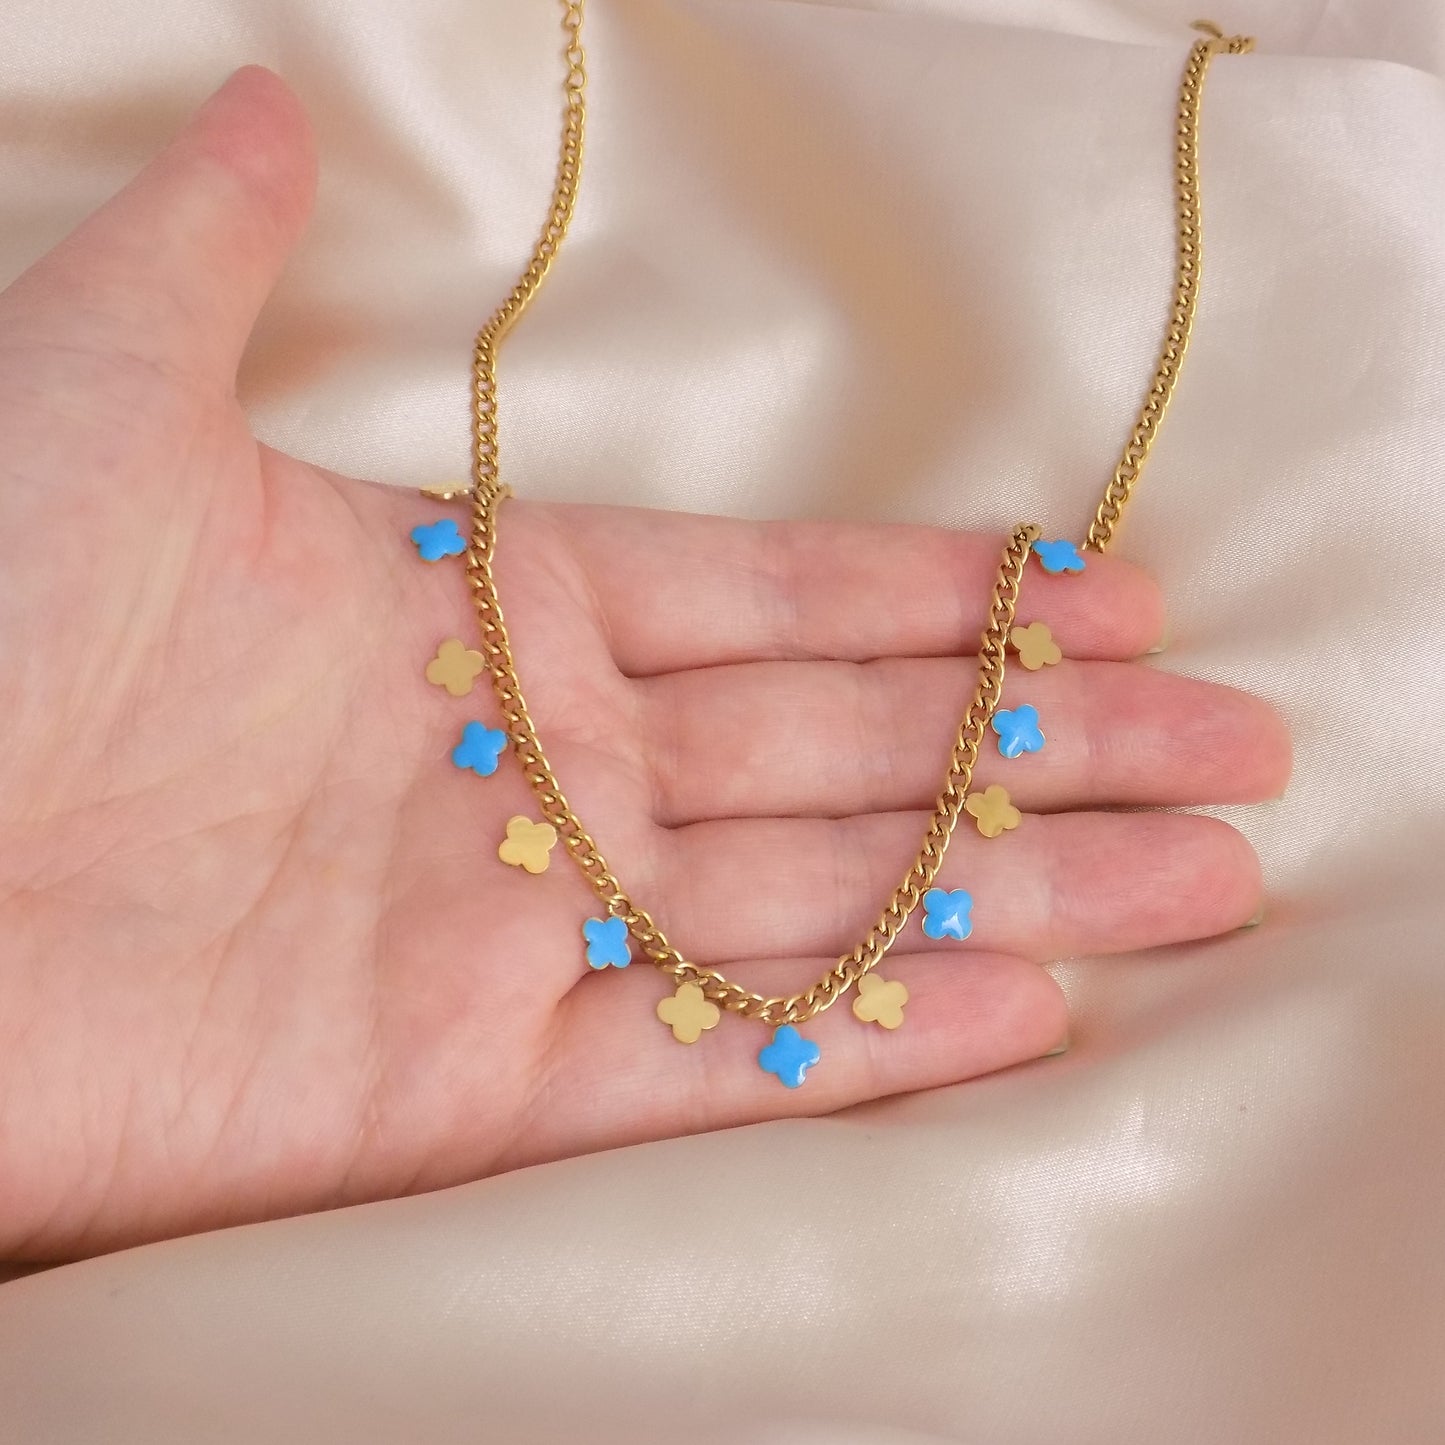 Gold Clover Necklace - Turquoise Enamel - 18K Gold Stainless steel